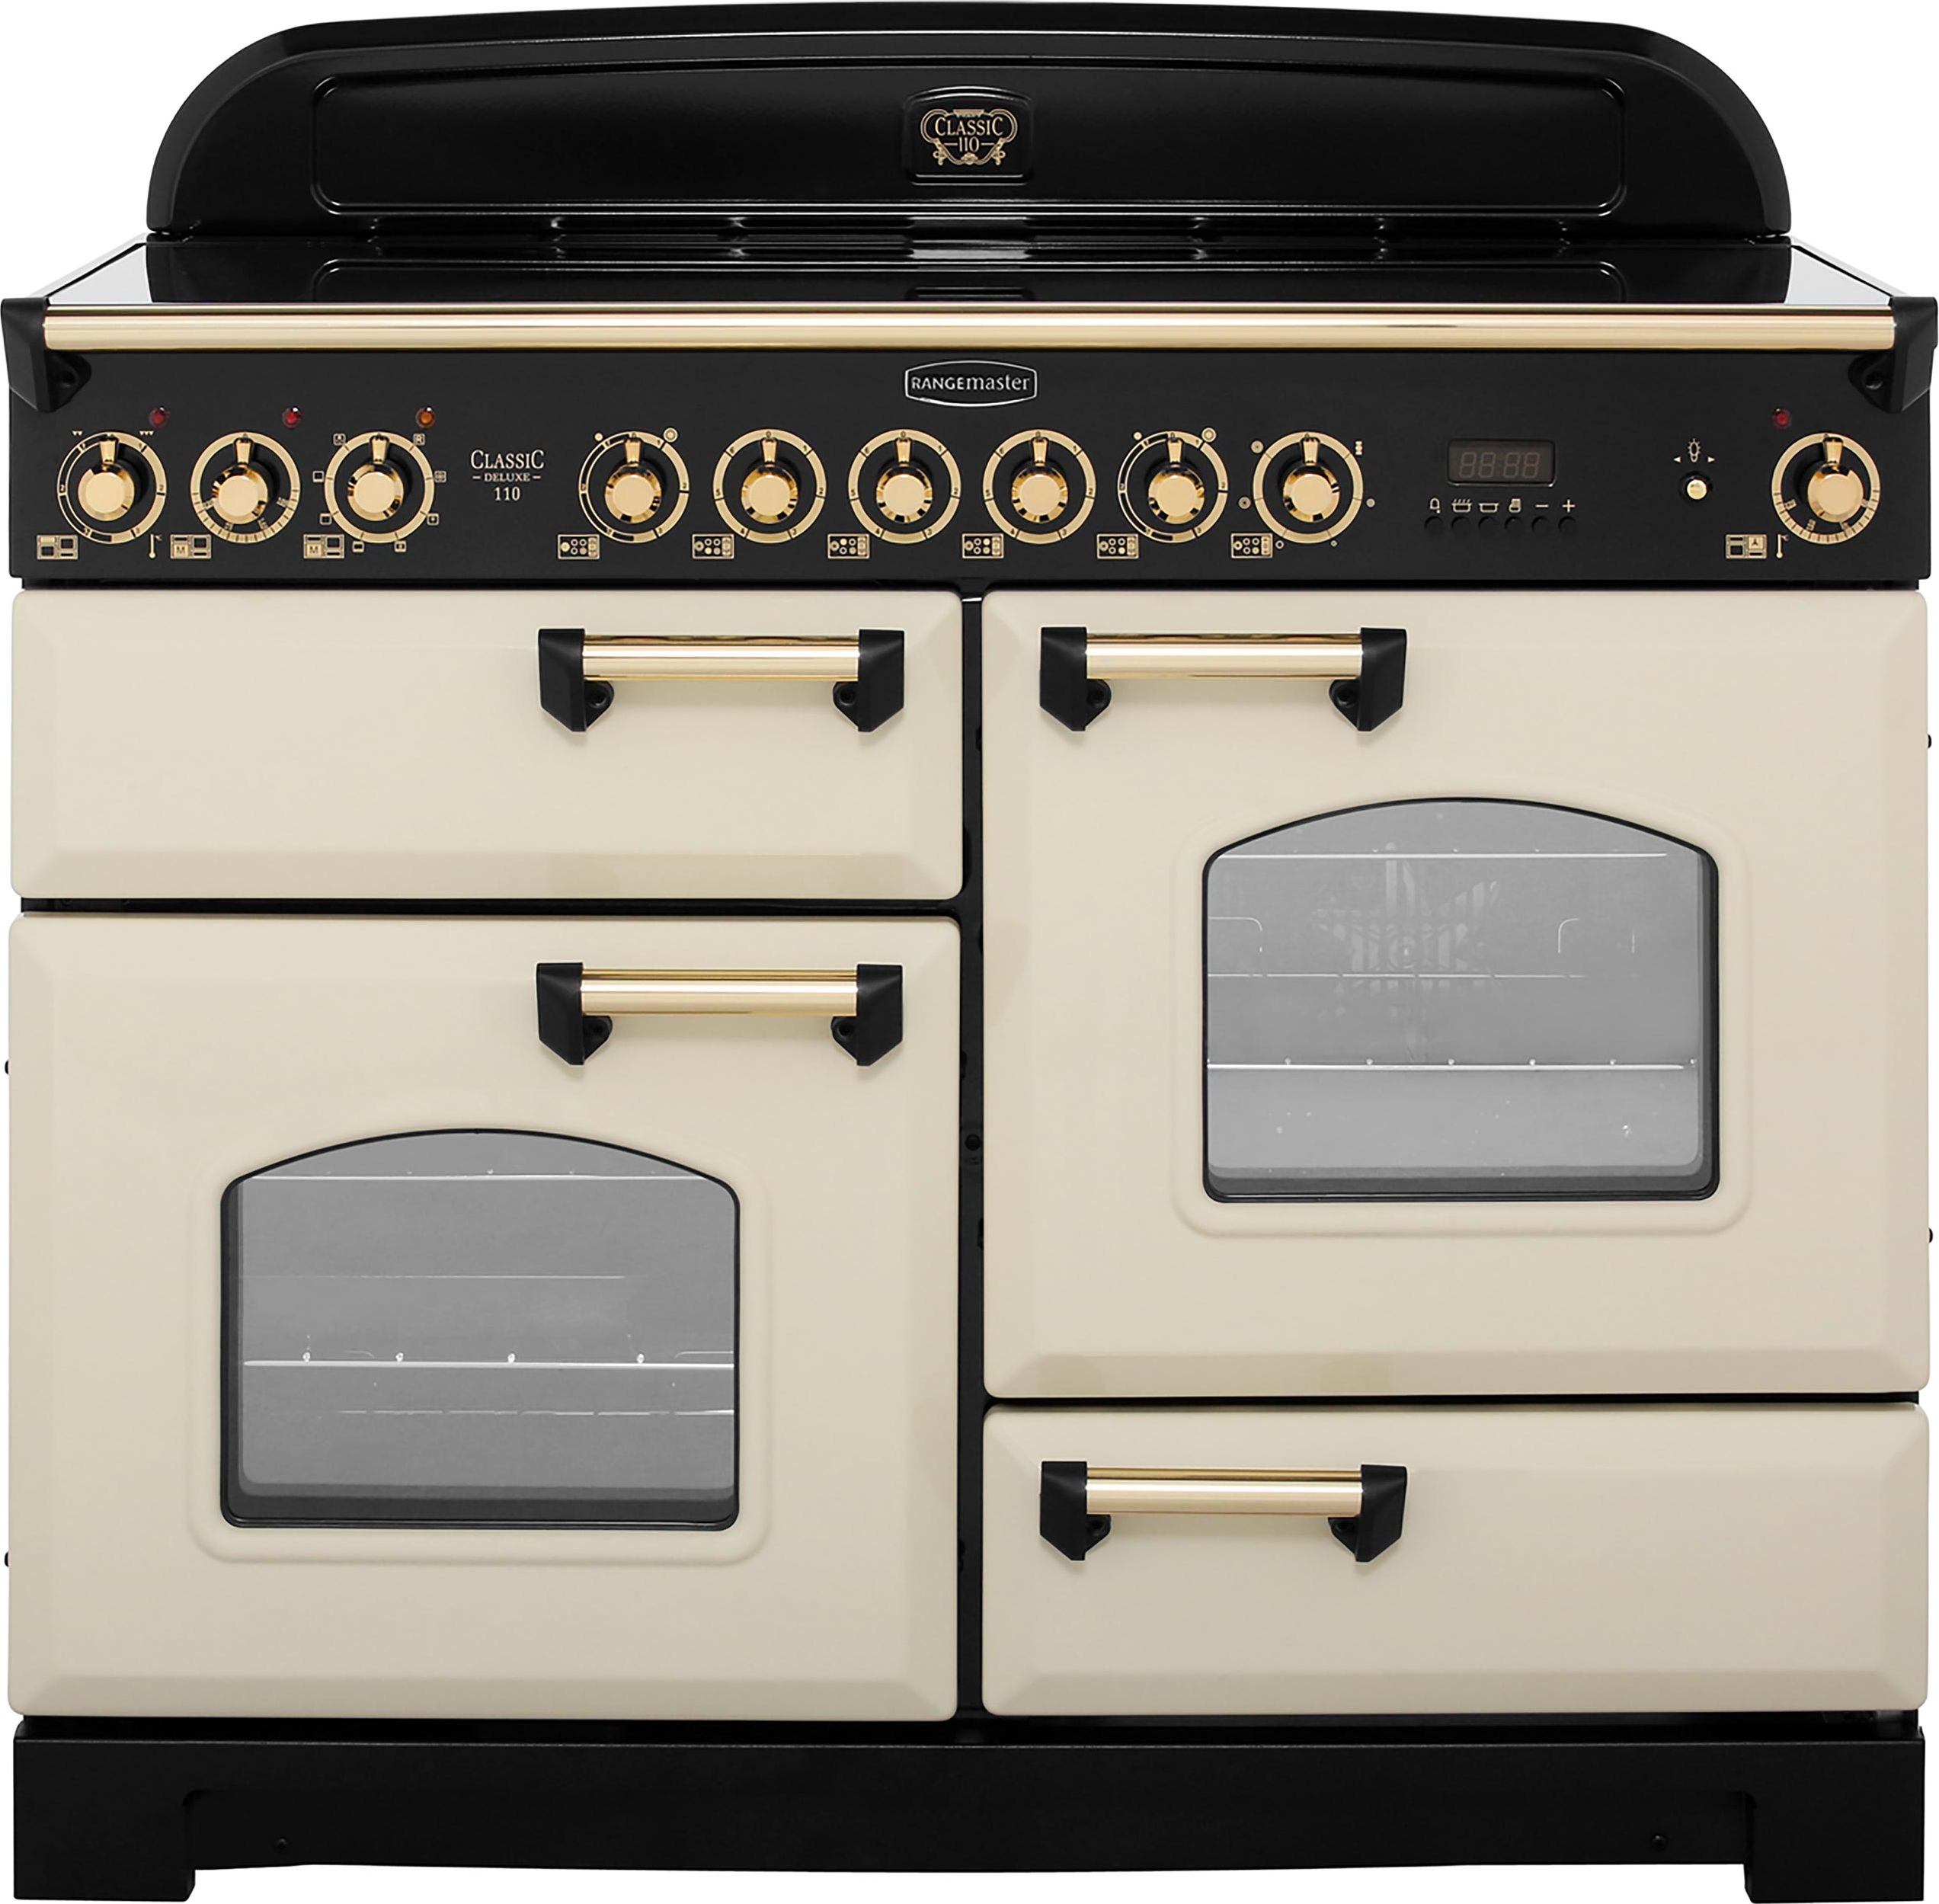 Rangemaster Classic Deluxe CDL110ECCR/B 110cm Electric Range Cooker with Ceramic Hob - Cream / Brass - A/A Rated, Cream